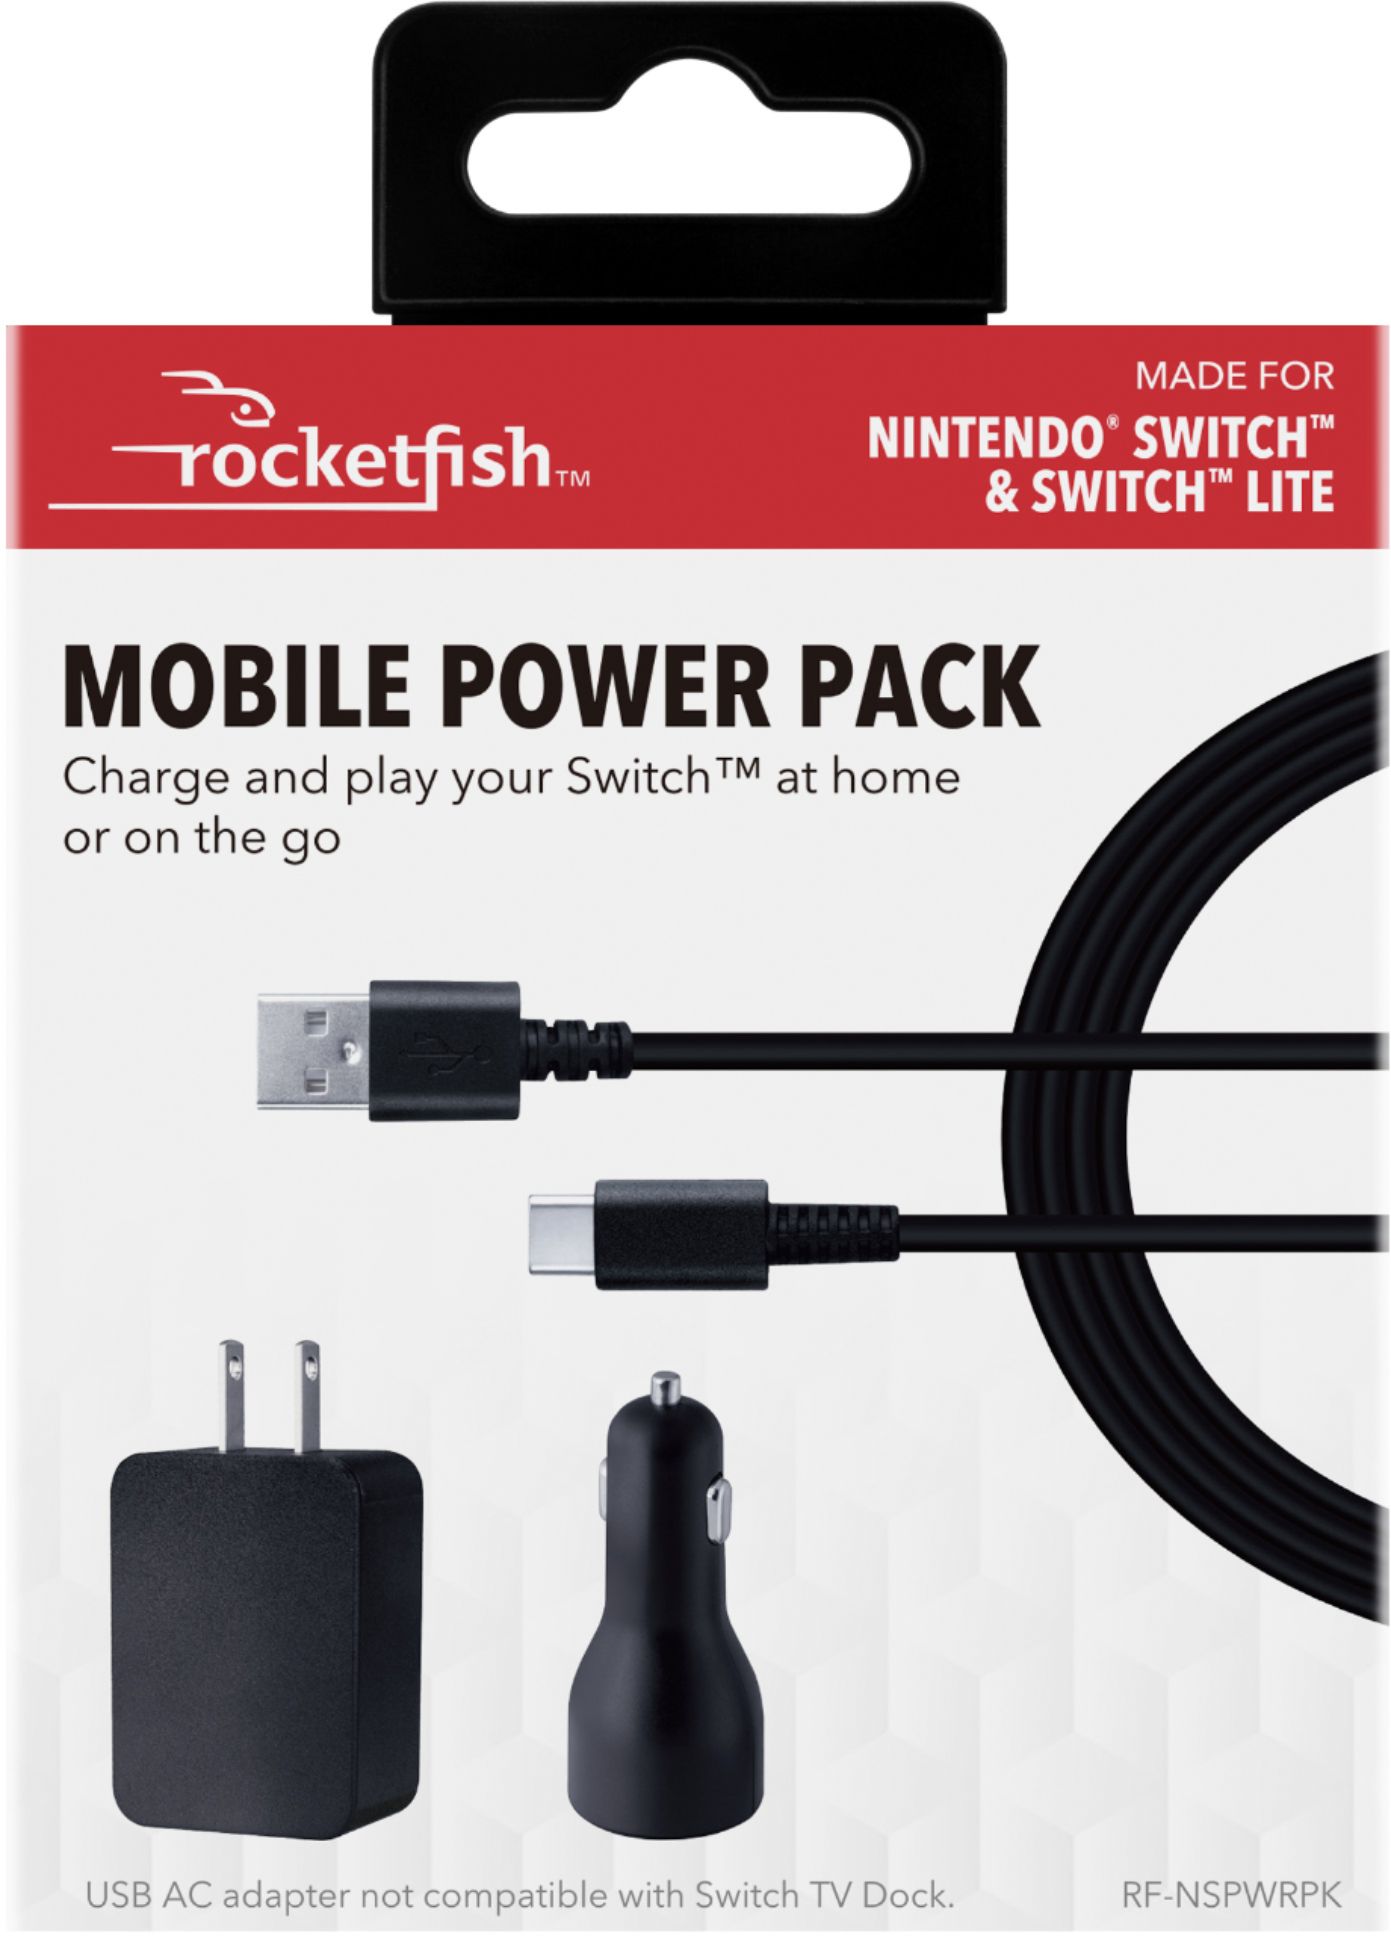 Nintendo Switch Uses USB-C for Charging